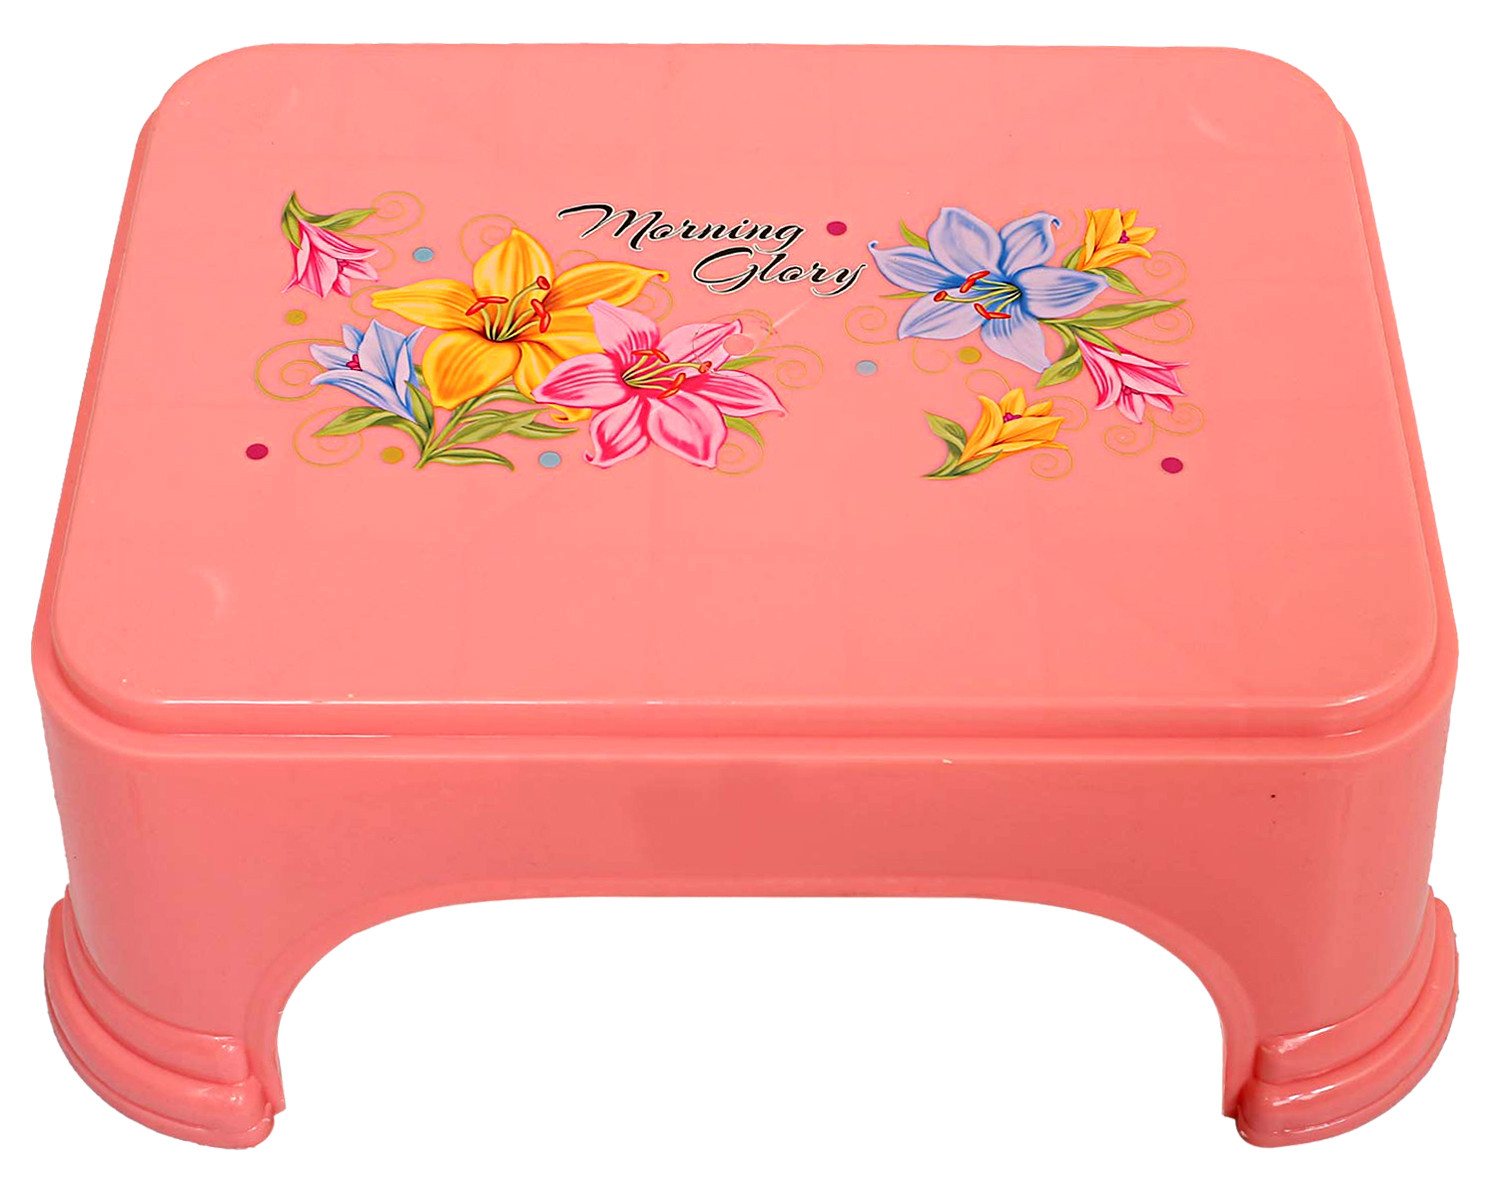 Kuber Industries Floral Print Plastic Bathroom Stool, Adults Simple Style Stool Anti-Slip with Strong Bearing Stool for Home, Office, Kindergarten, Pink